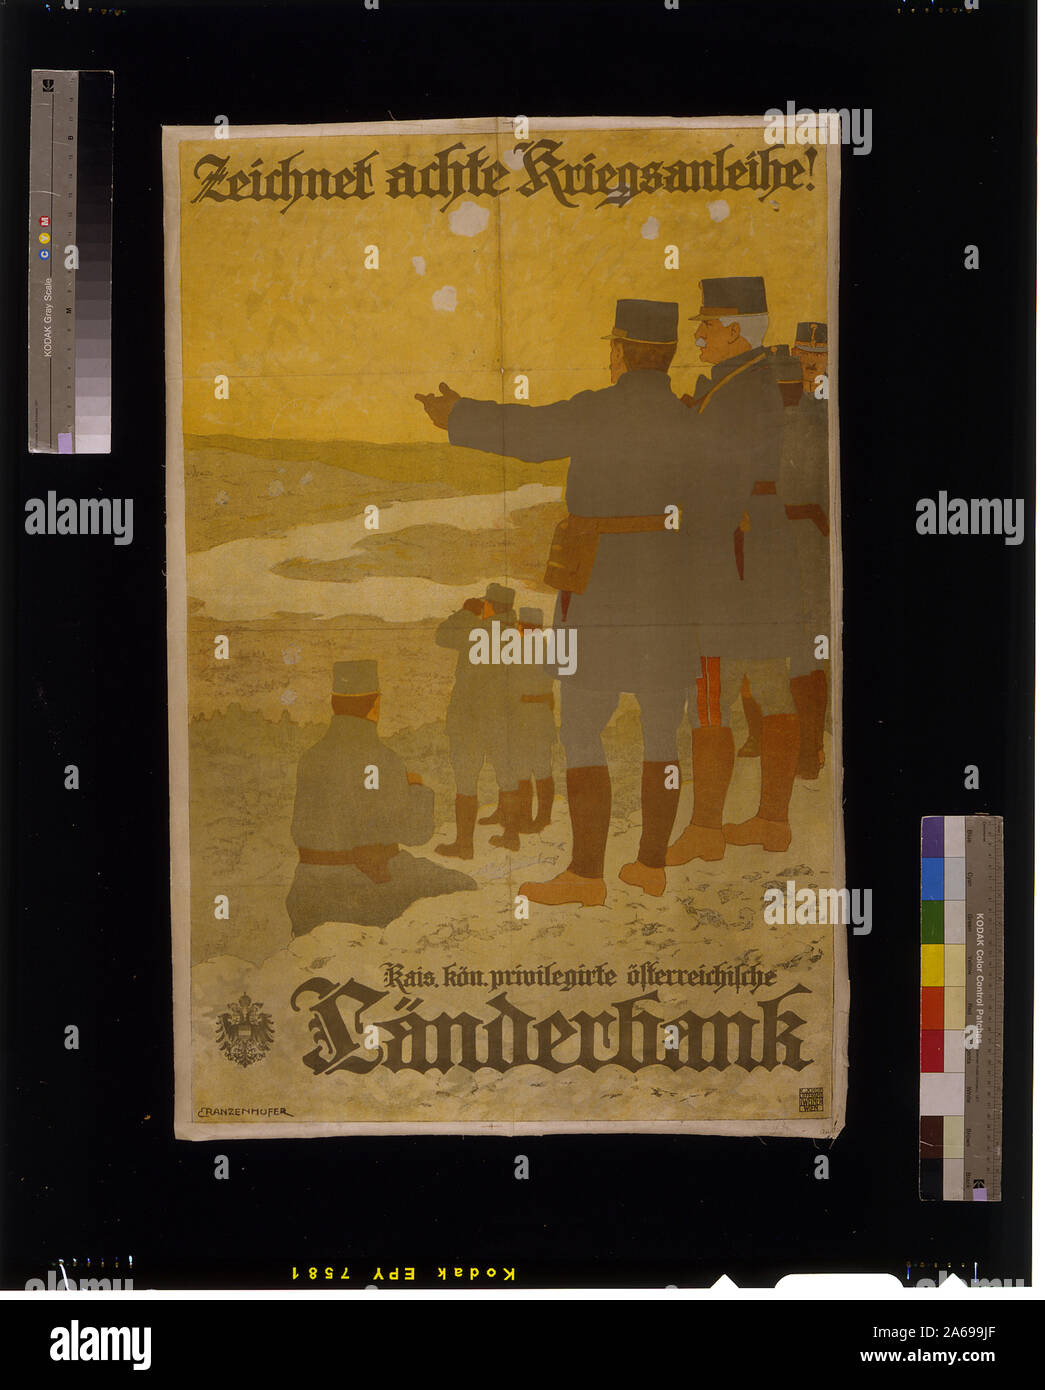 Zeichnet achte Kriegsanleihe! Abstract: Poster shows Austrian officers and soldiers standing on a hill looking toward a river in the distance. Text: Subscribe to the 8th War Loan. Stock Photo